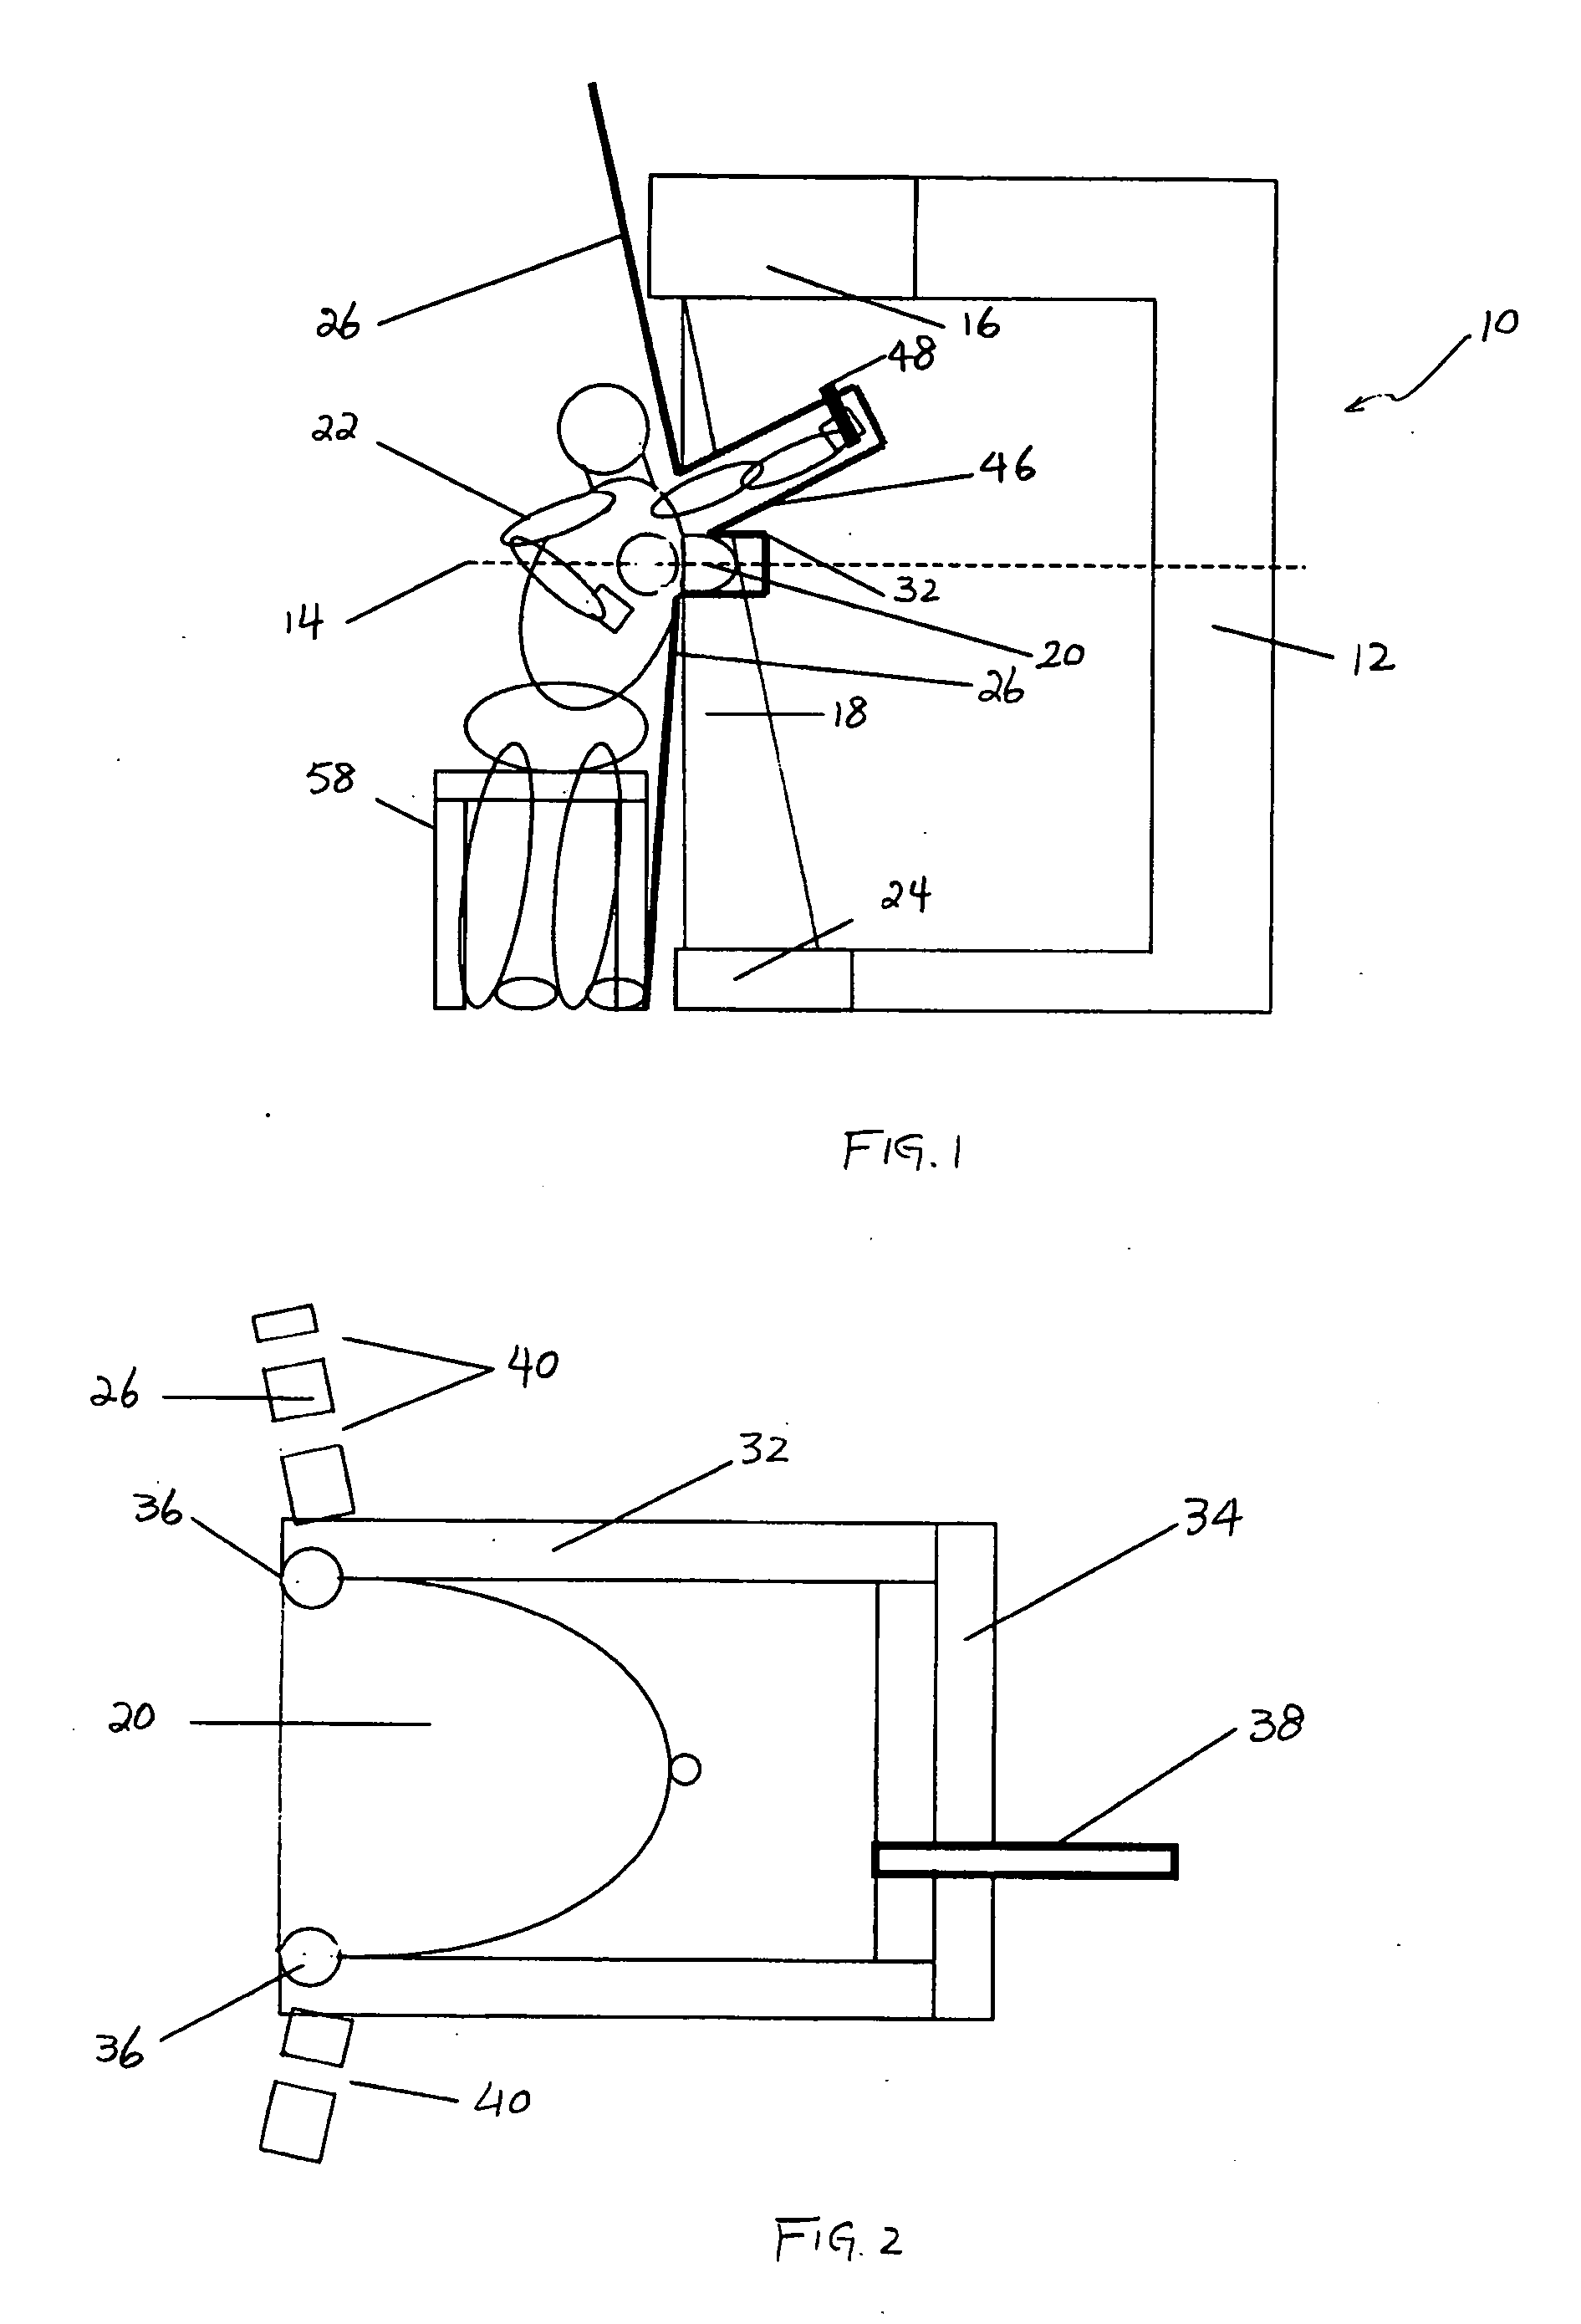 System and method for imaging and treatment of tumorous tissue in breasts using computed tomography and radiotherapy